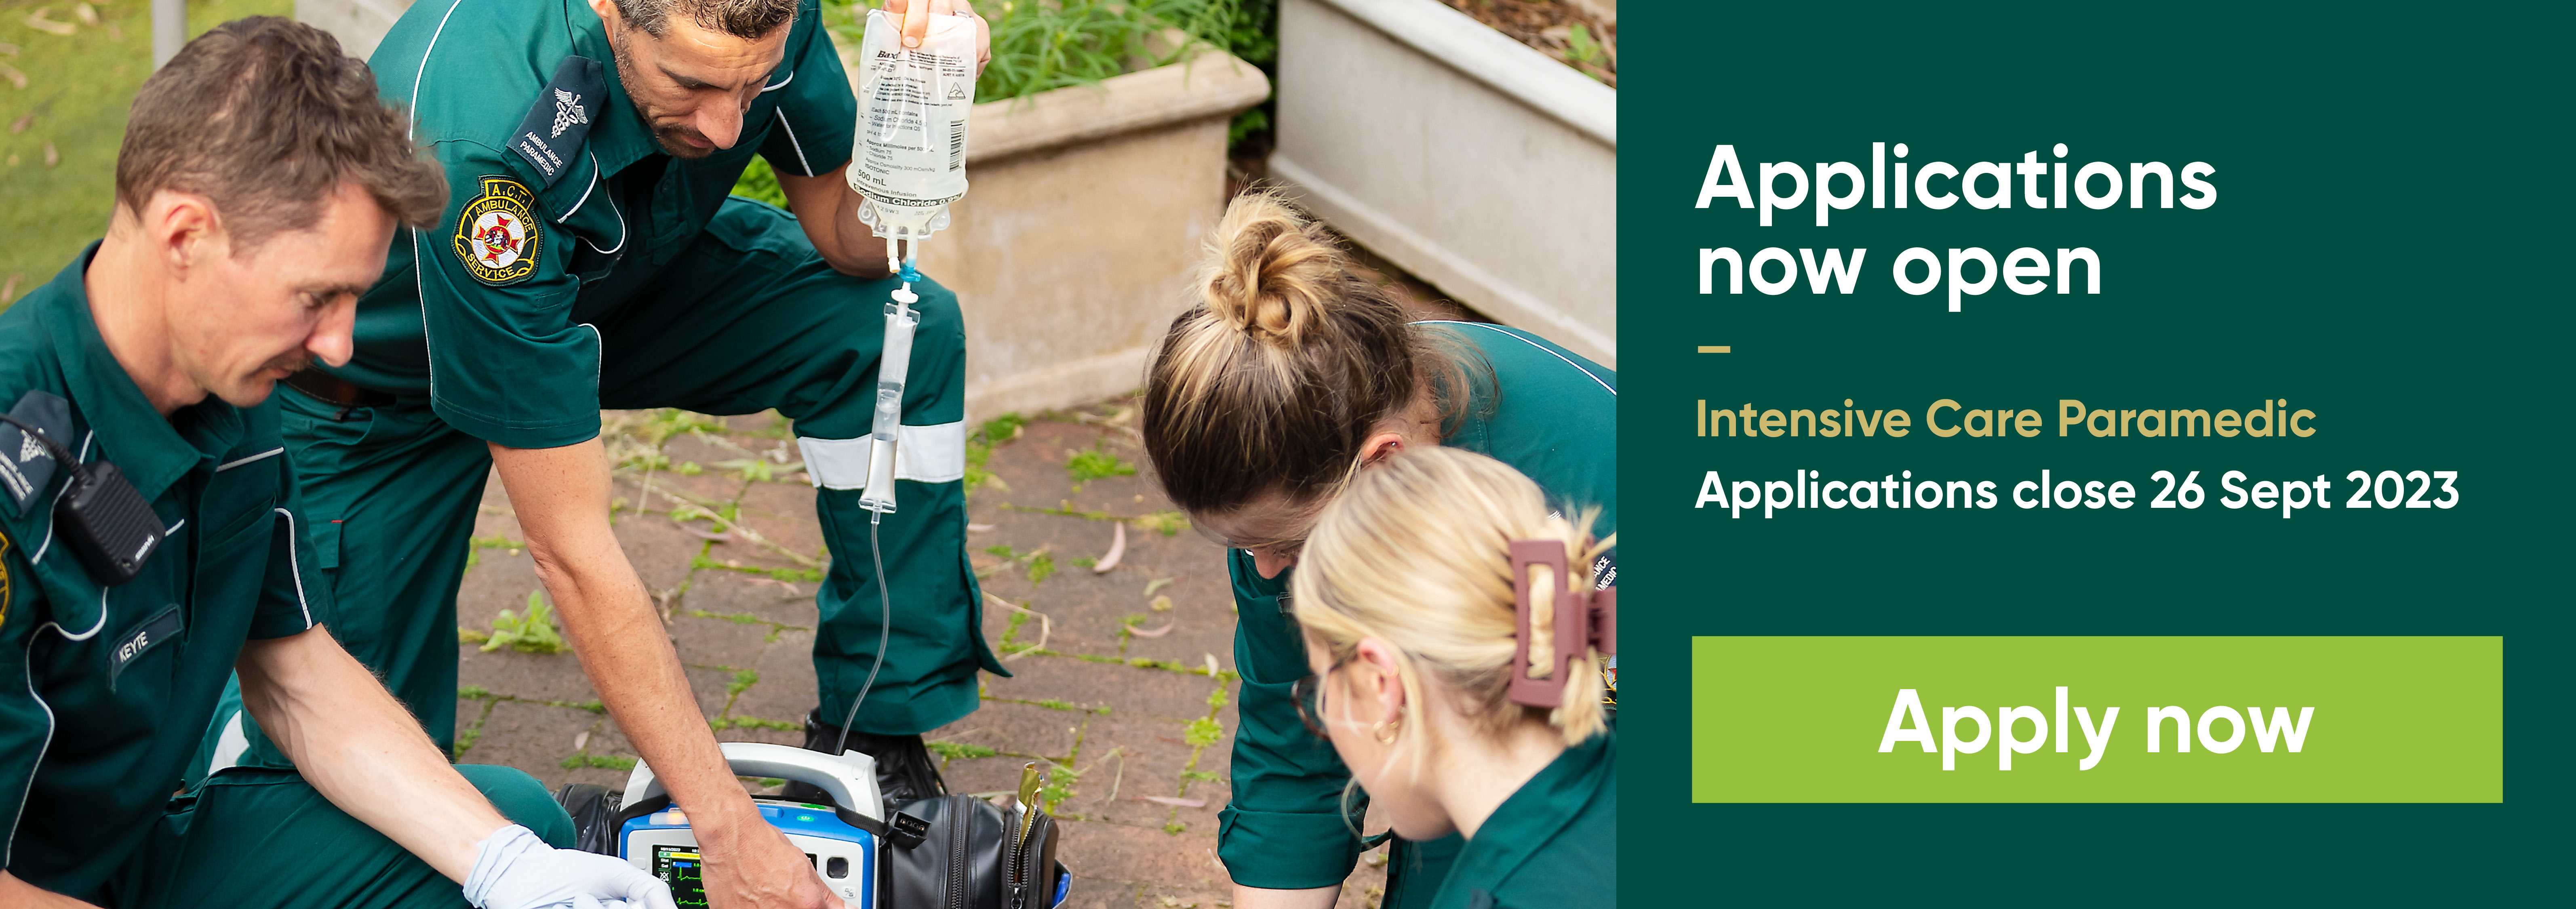 Applications no open for Intensive Care Paramedic. Applications close 26 September 2023. Apply now.